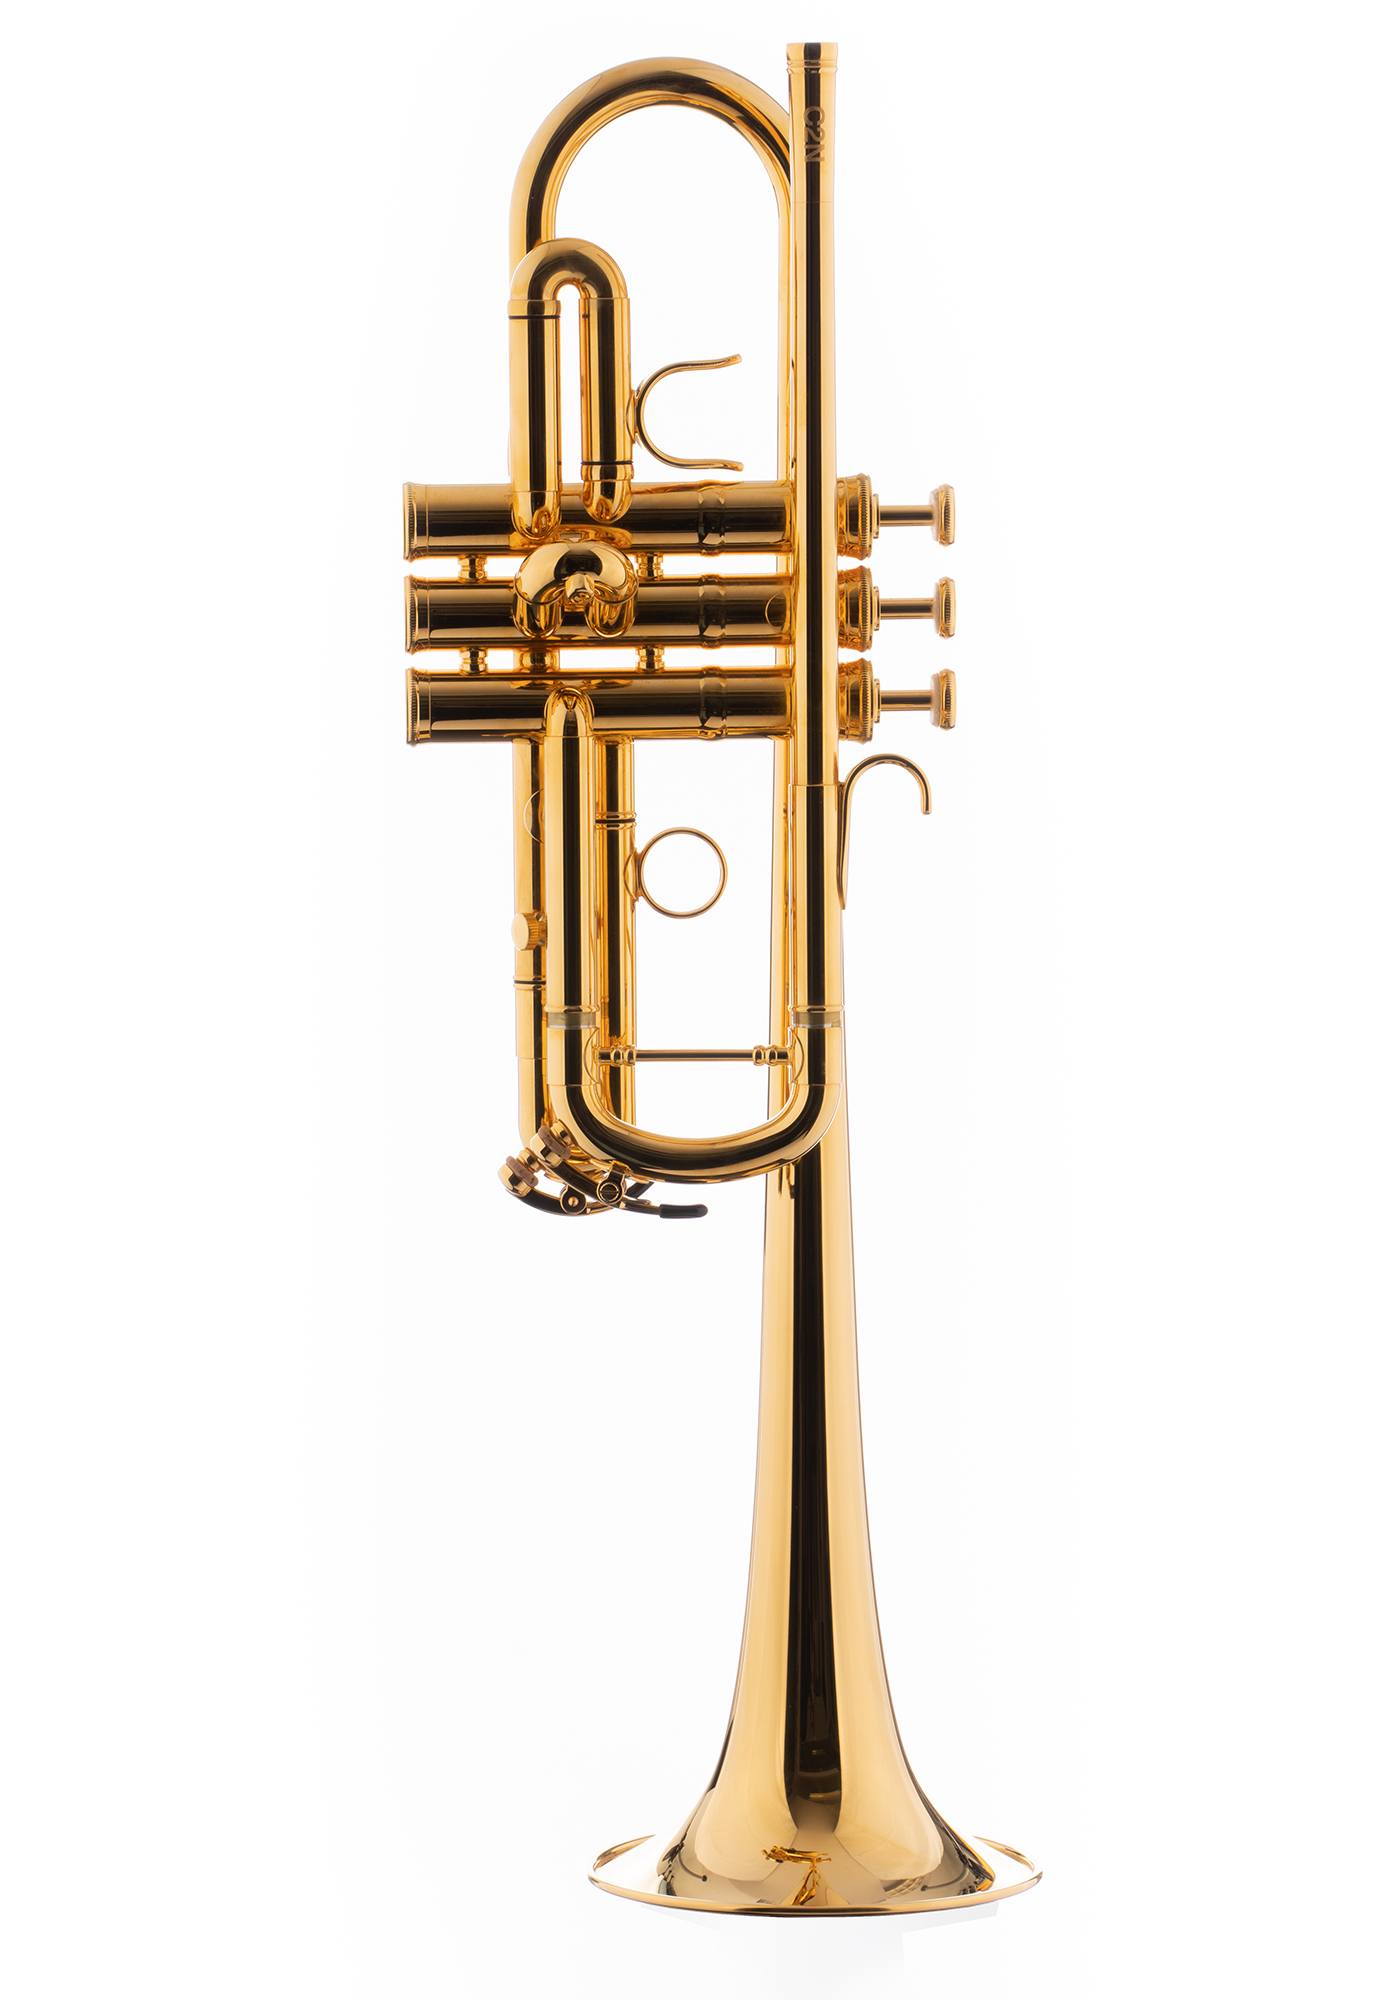 Schagerl C-Trumpet "1961" gold plated